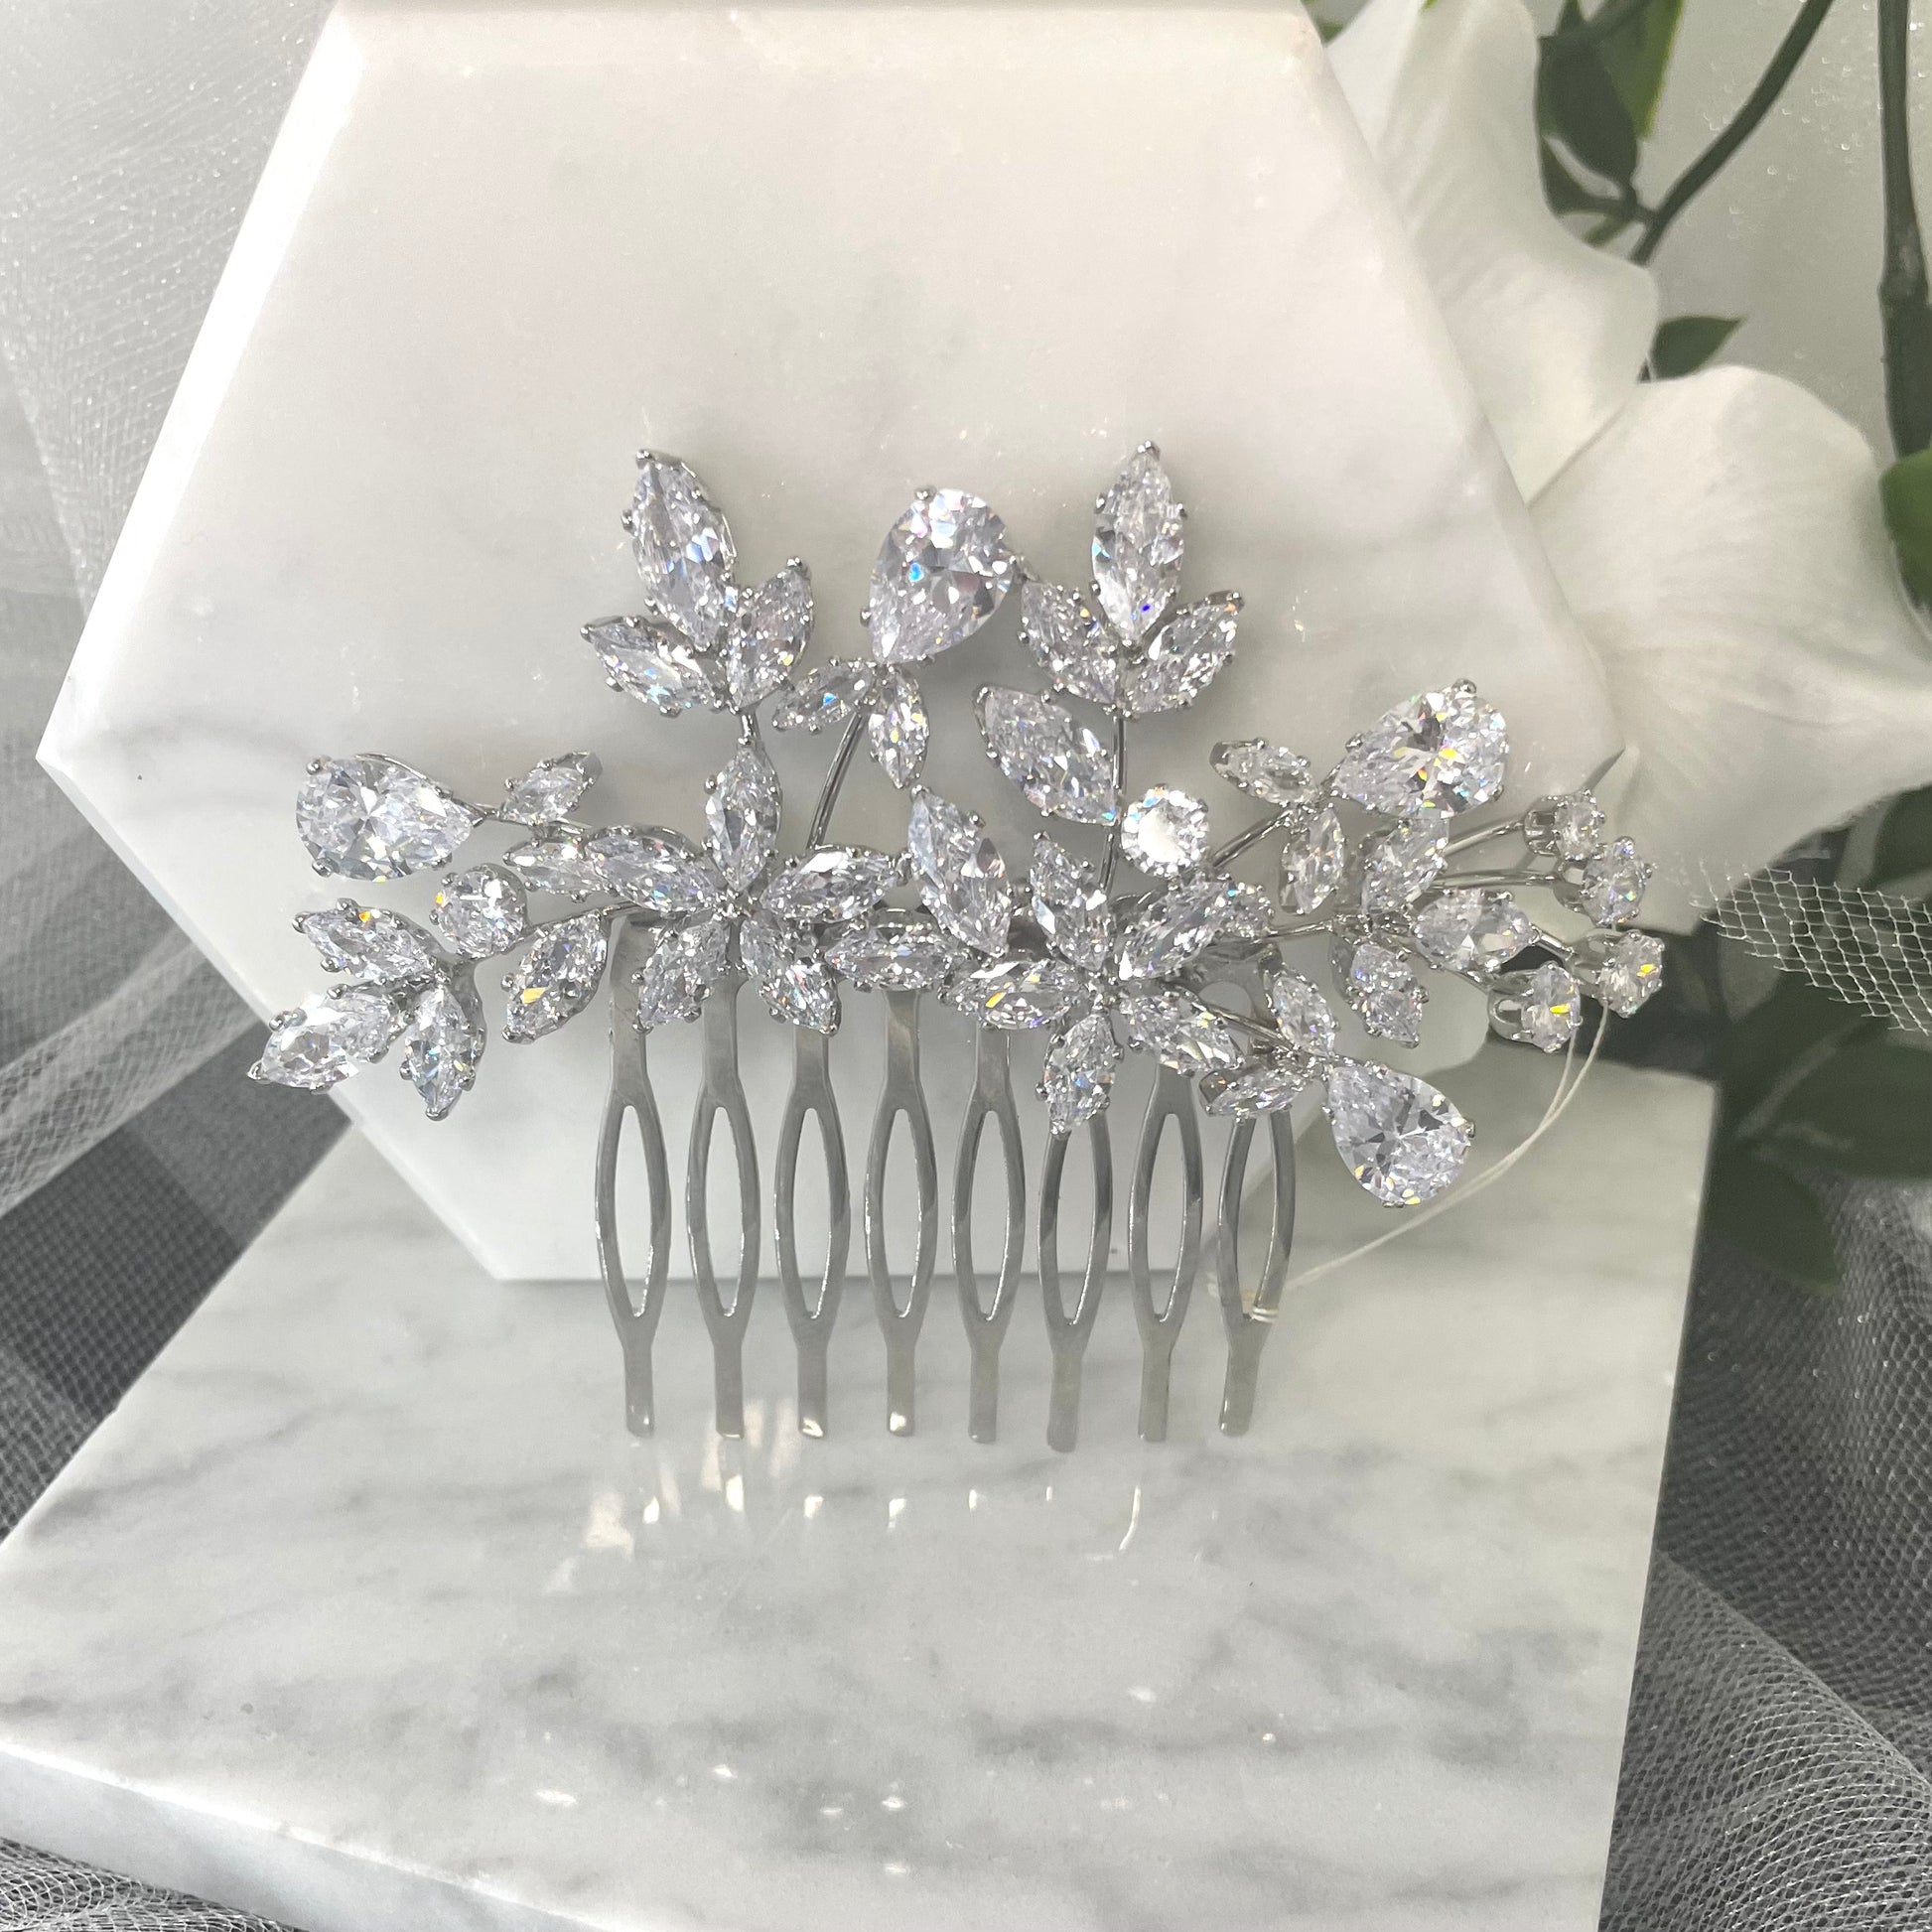 Quilla Bridal Wedding Hair Comb in silver, adorned with CZ crystals in a floral design, ideal for adding elegant sophistication to any bridal hairstyle.